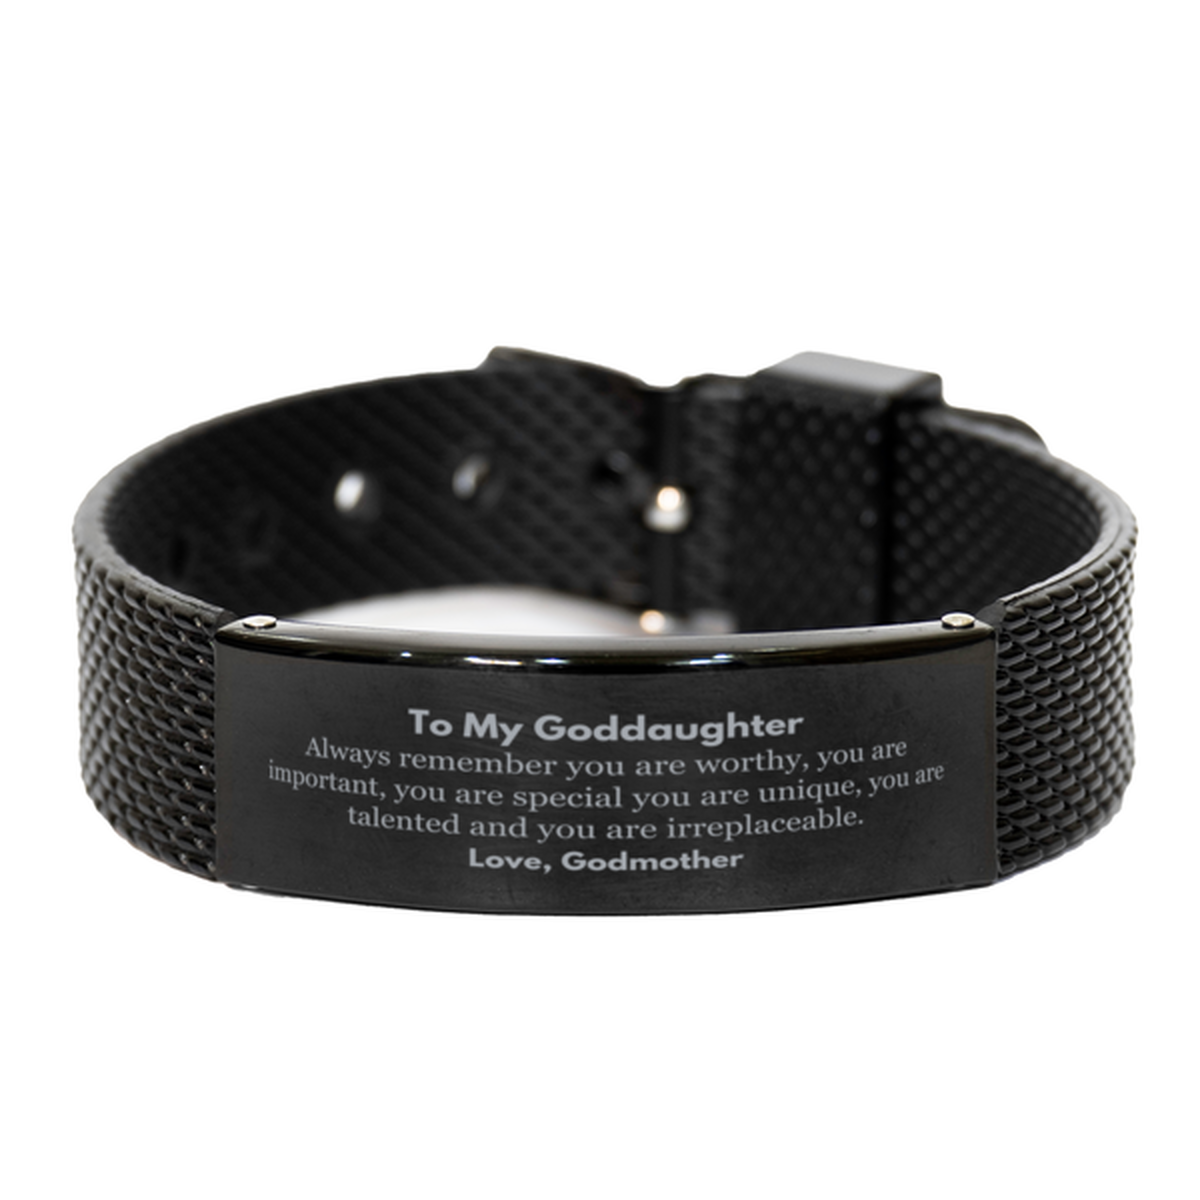 Goddaughter Birthday Gifts from Godmother, Inspirational Black Shark Mesh Bracelet for Goddaughter Christmas Graduation Gifts for Goddaughter Always remember you are worthy, you are important. Love, Godmother